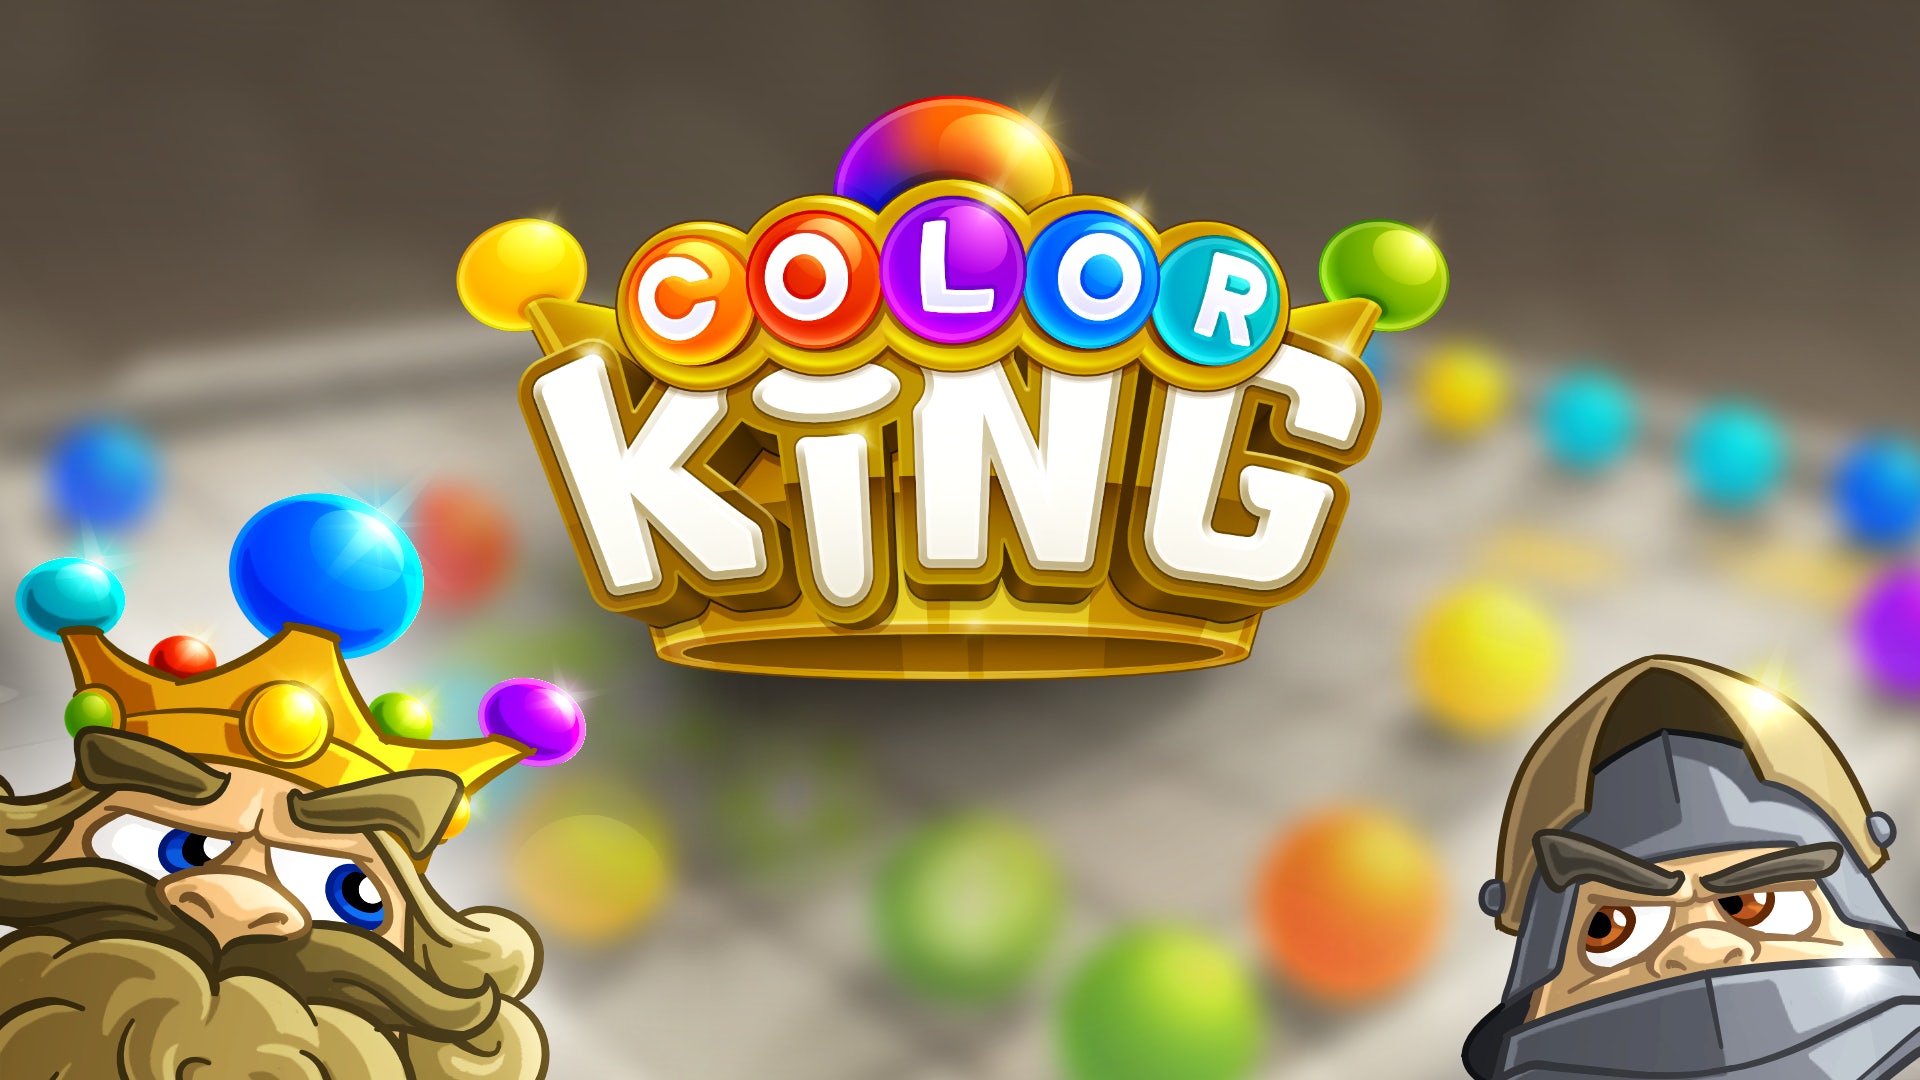 Color King